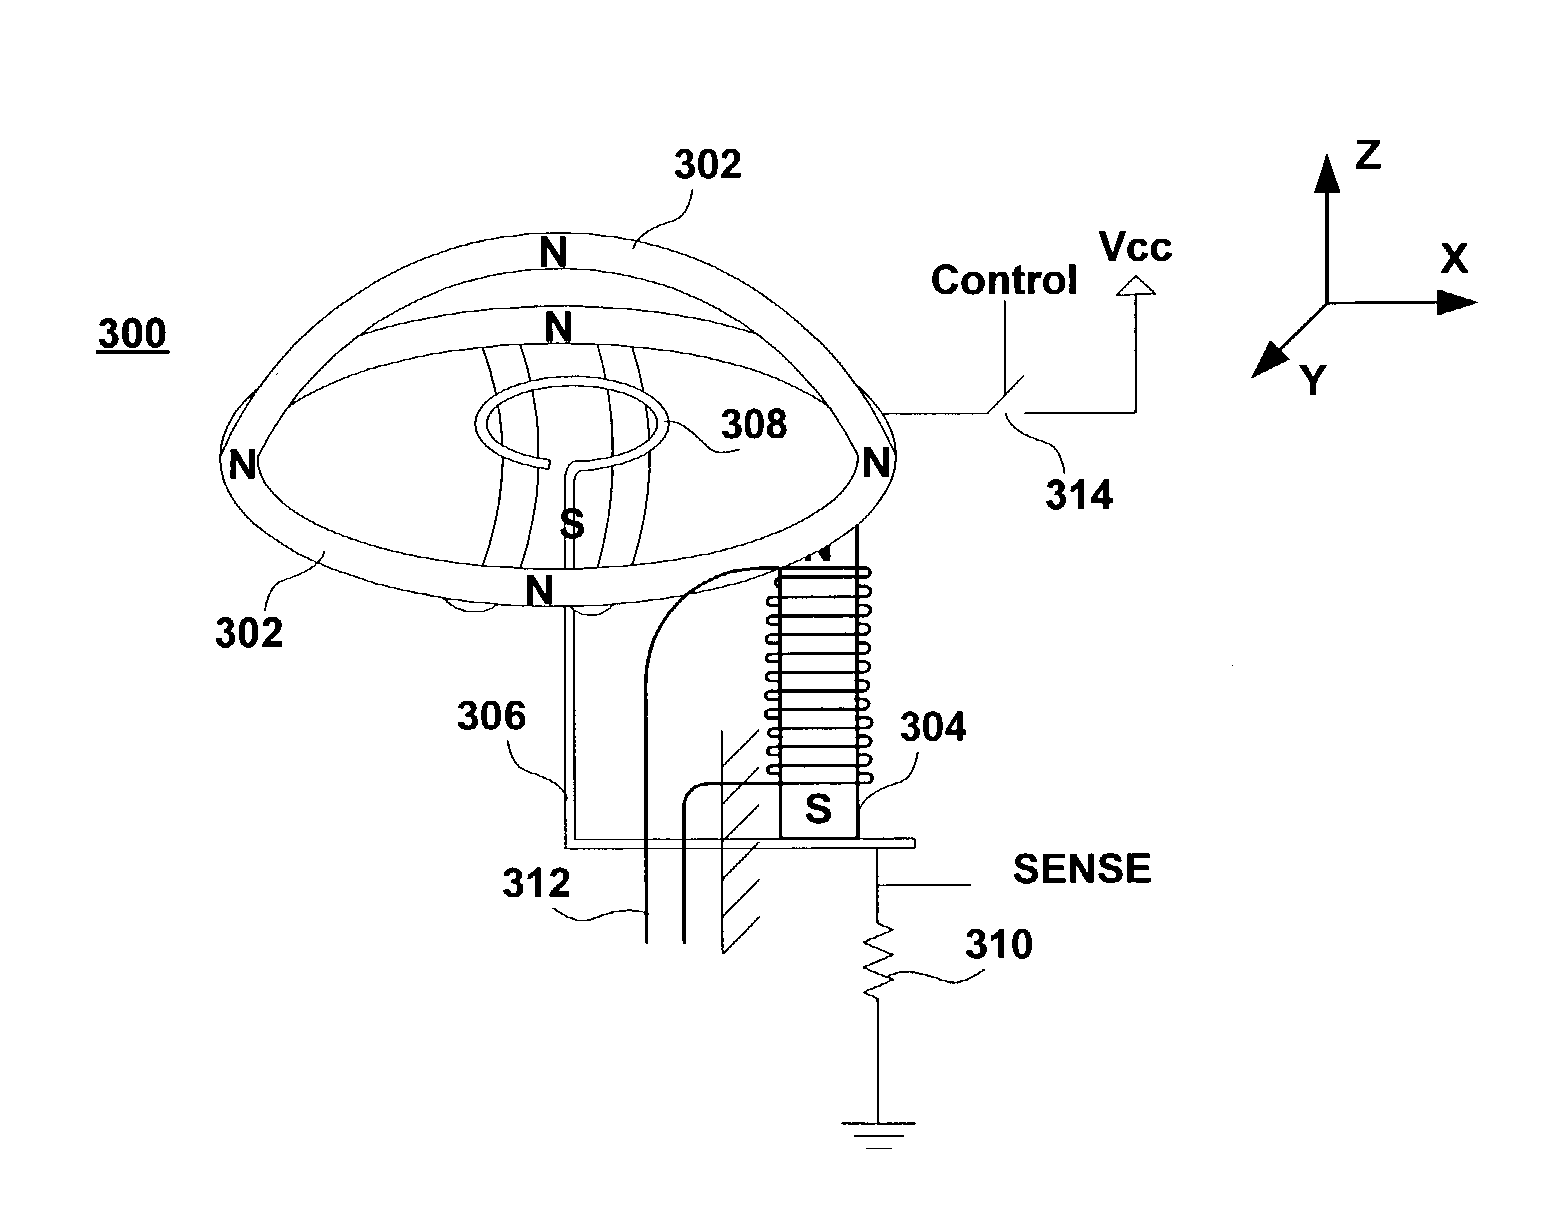 Disk drives and host devices including a resetable shock sensor